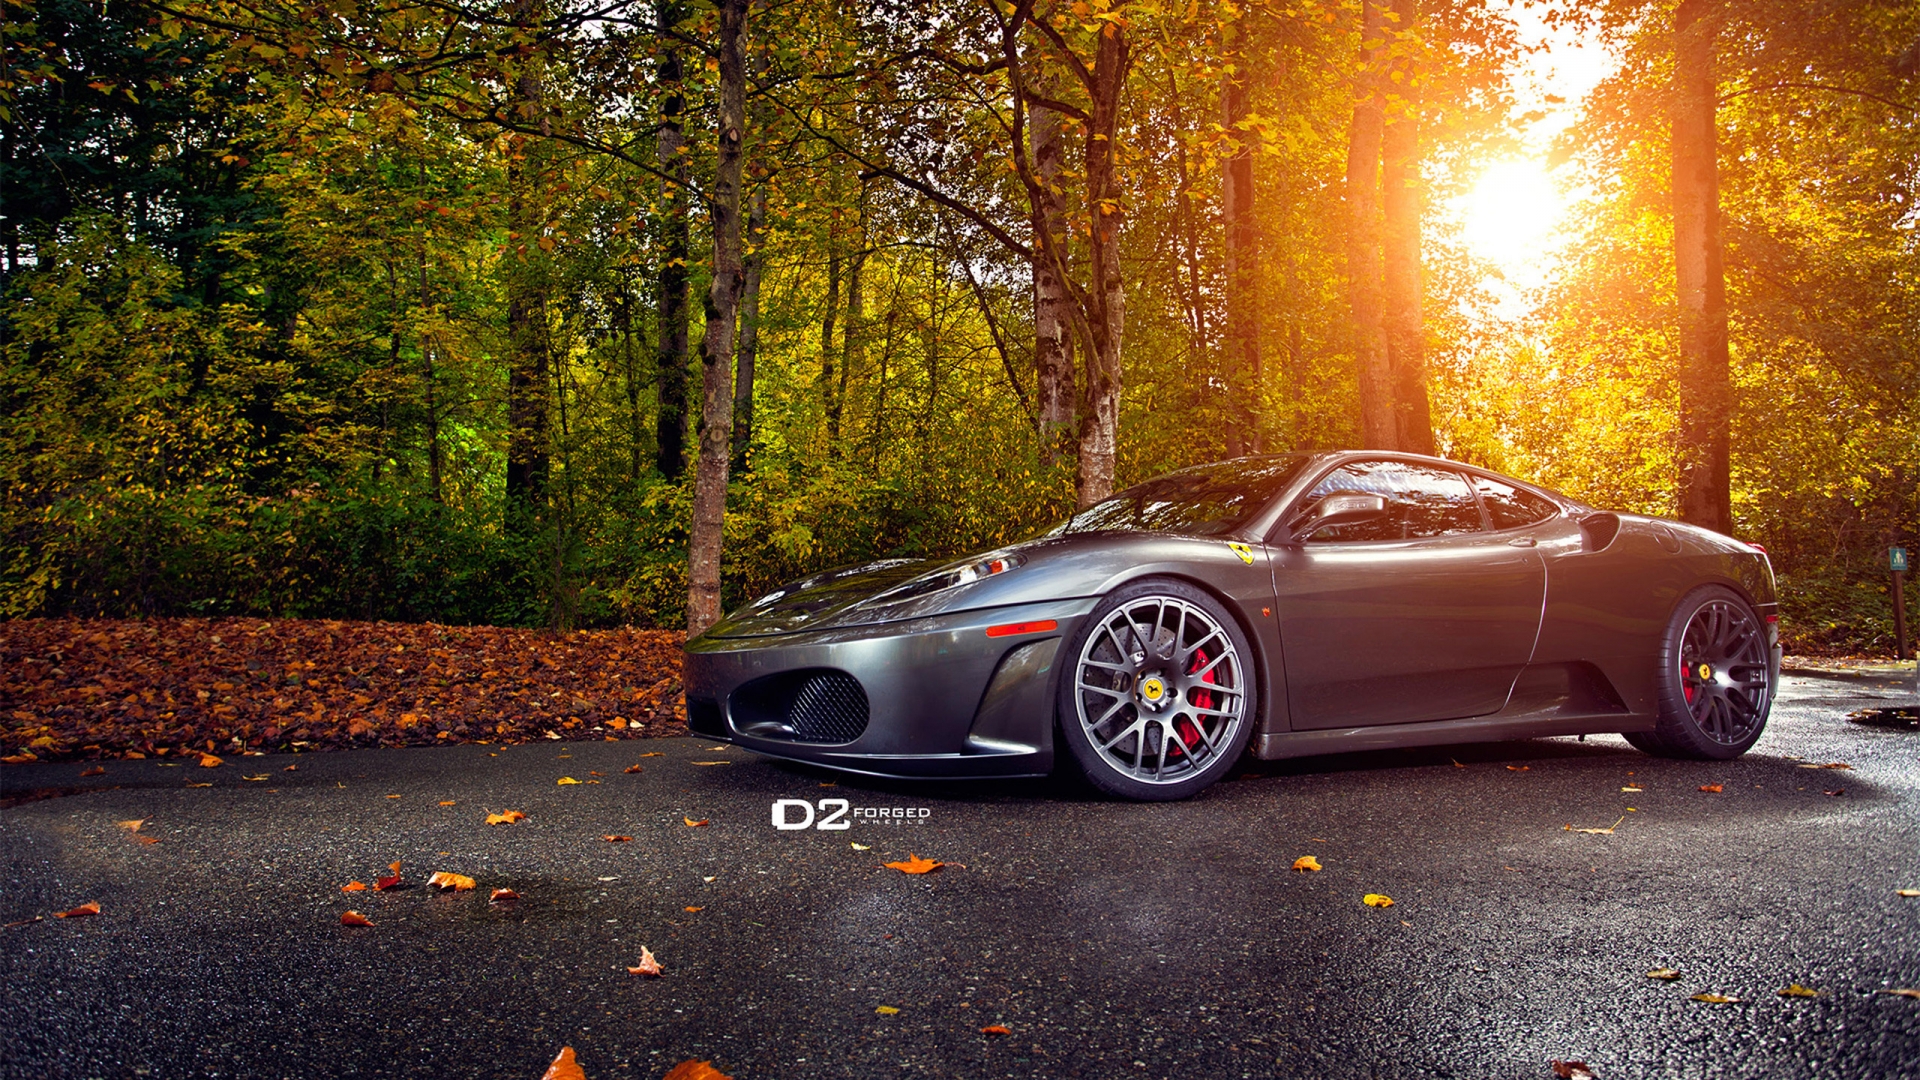 Amazing Ferrari by D2Forged for 1920 x 1080 HDTV 1080p resolution